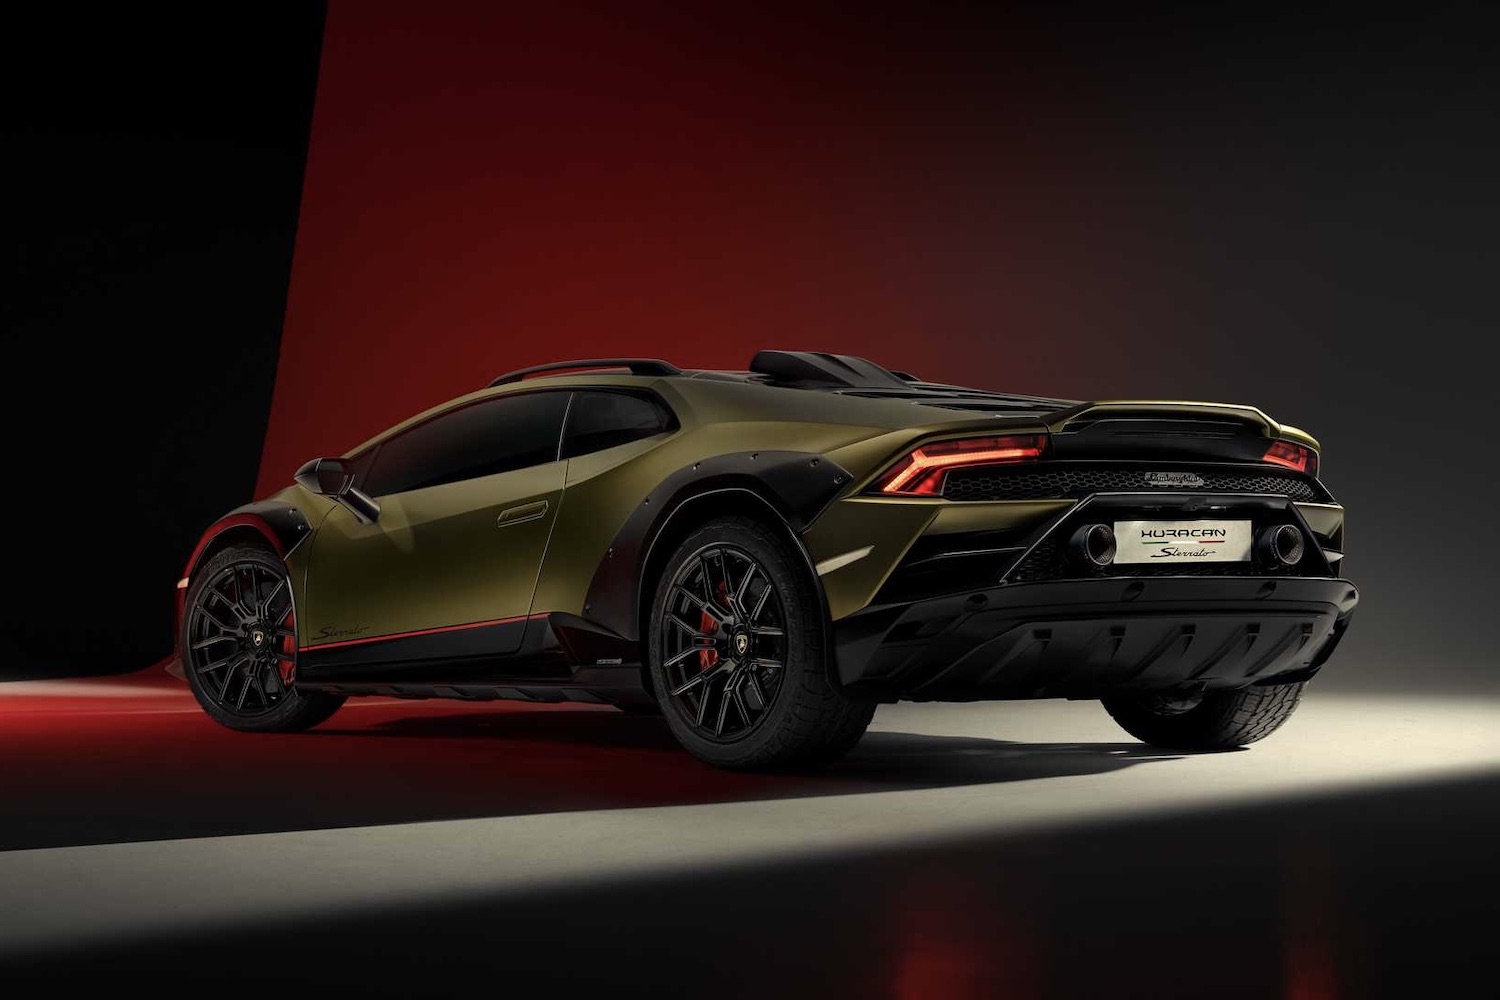 2023 Lamborghini Huracan rear end angle from driver's side in a studio with red, black, and white lighting with taillights on.